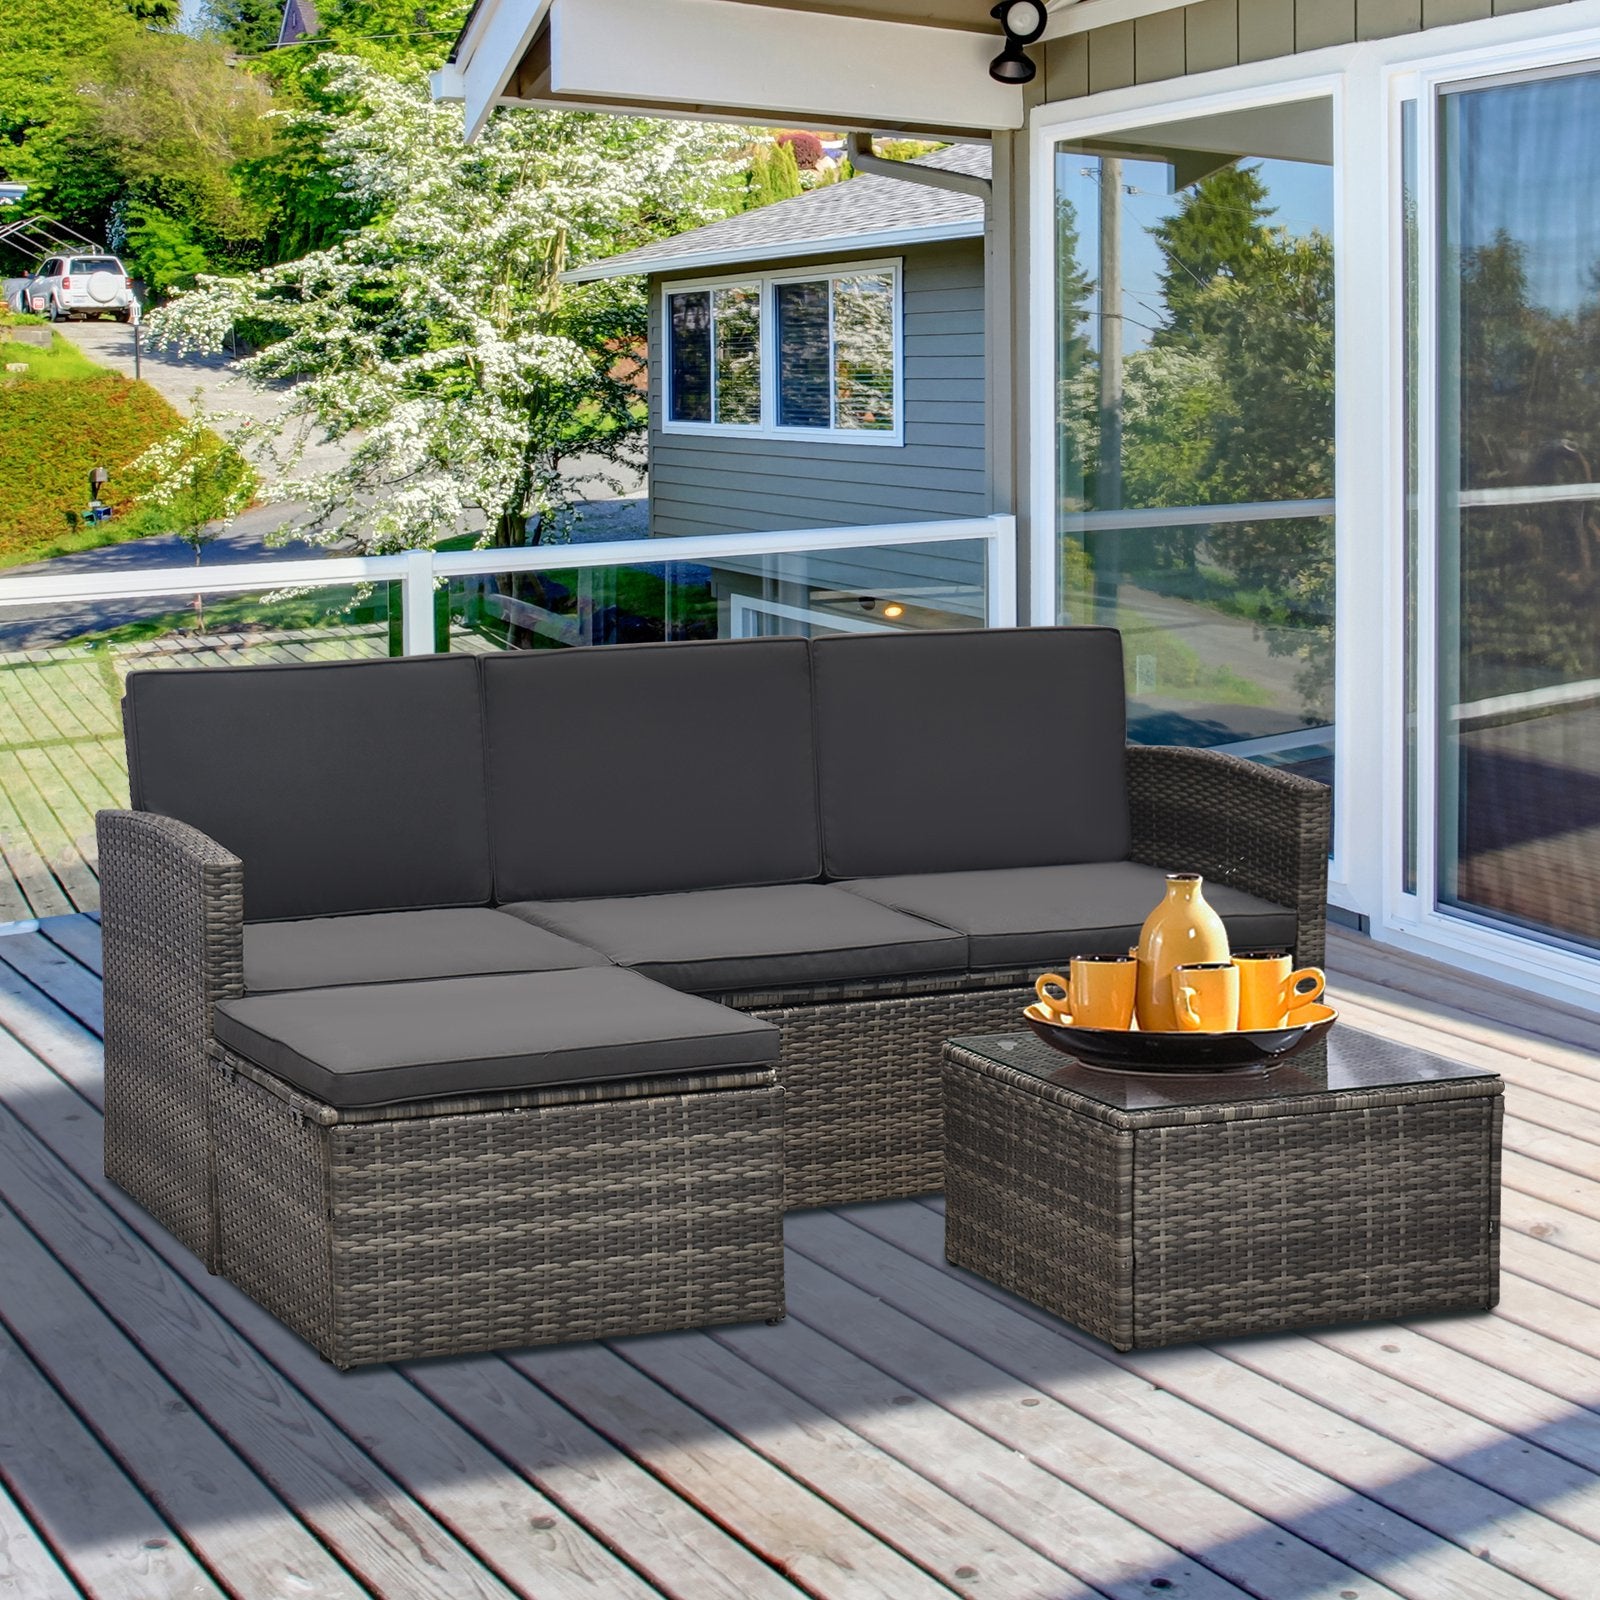 Outsunny 4-Seater Outdoor Garden Rattan Furniture Set w/ Table Grey